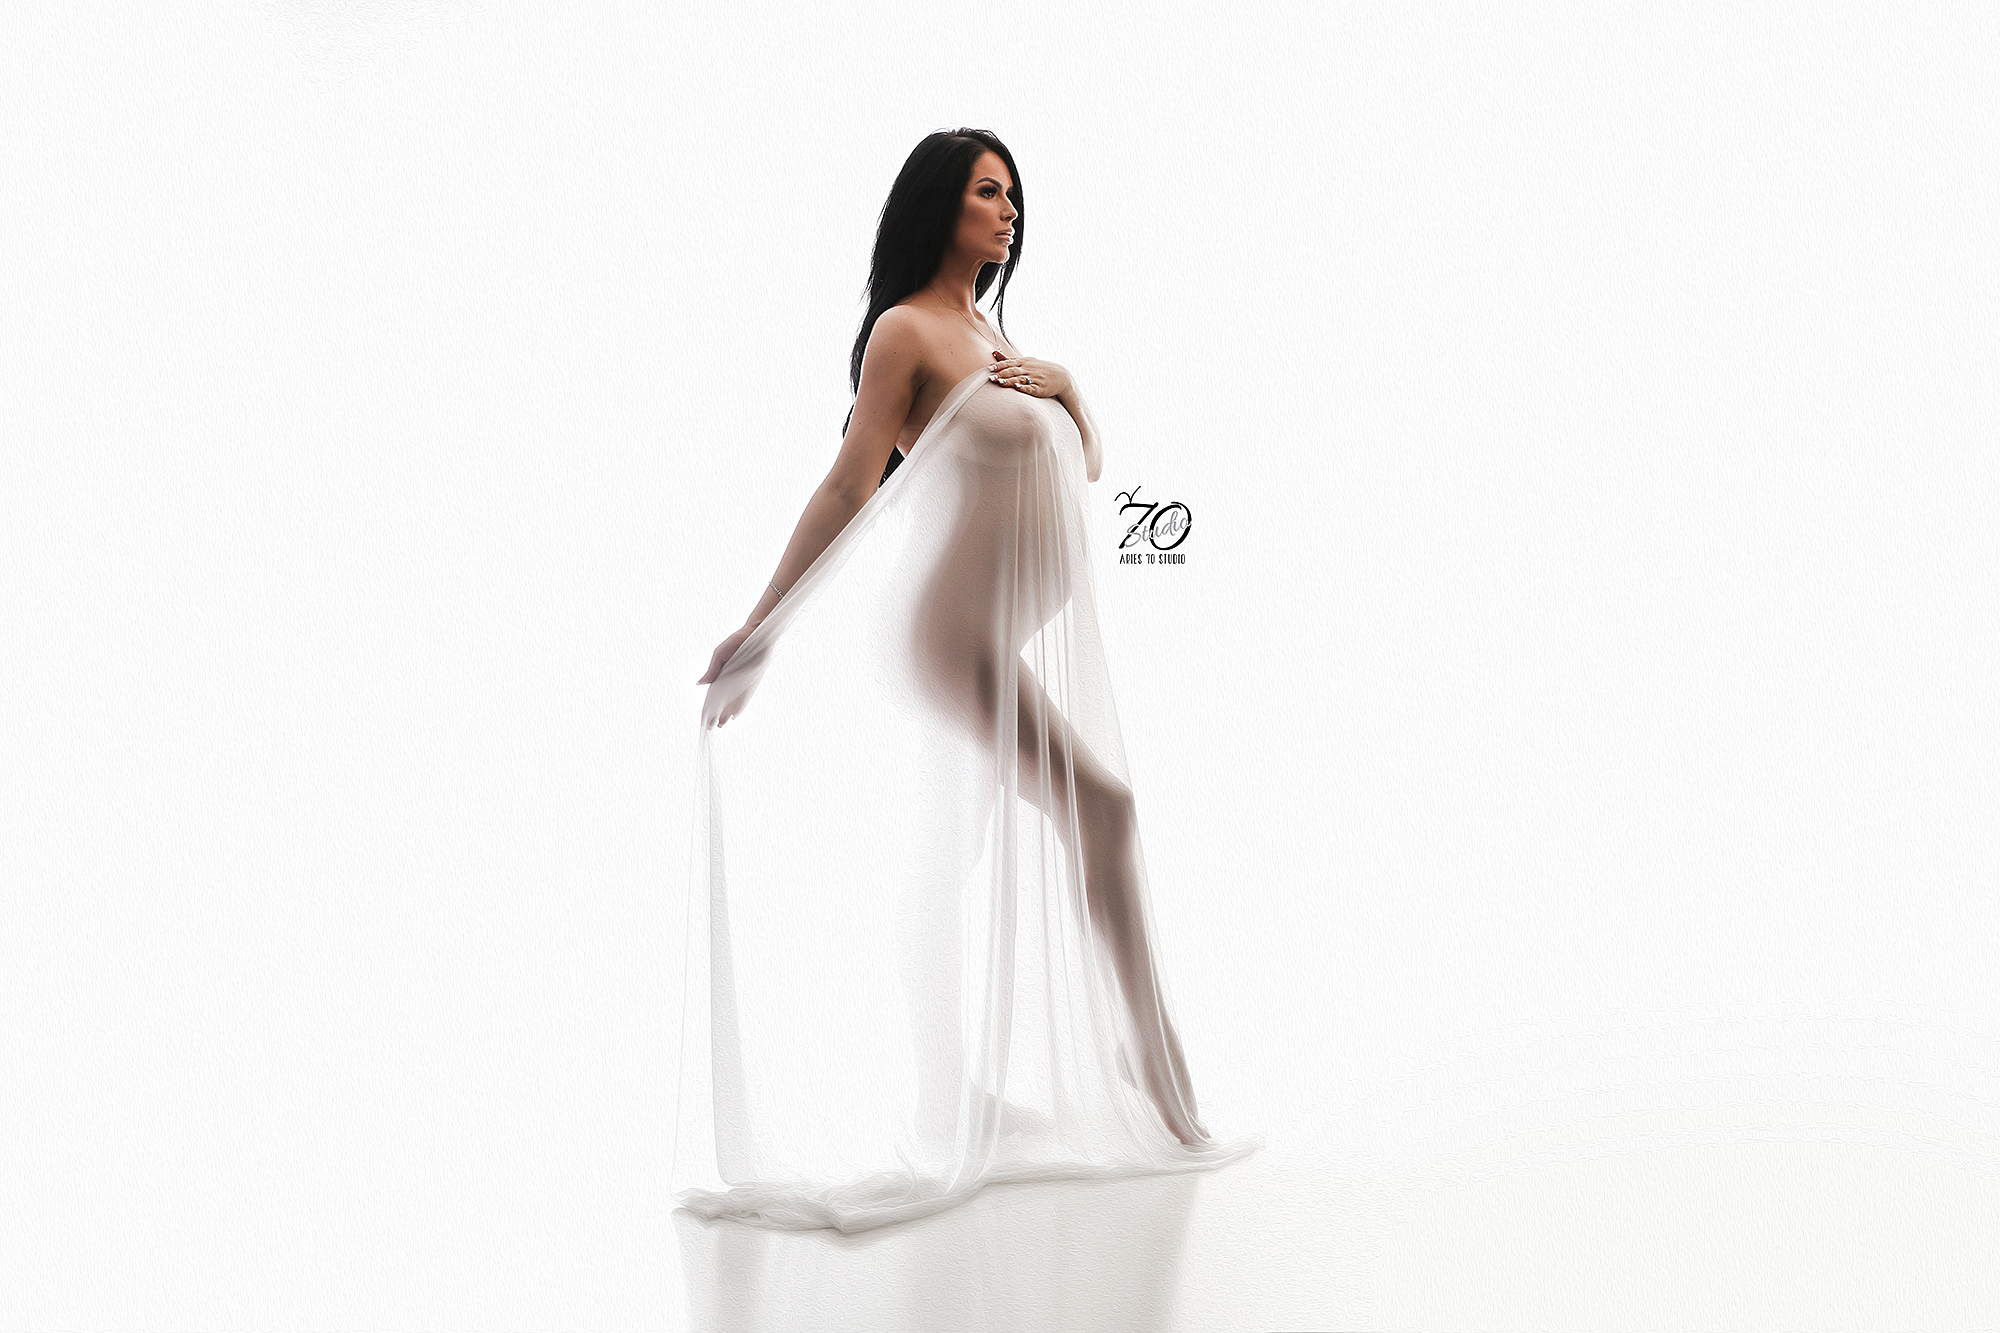 2021 Maternity Session Sarah-Jane Laforcarde-23.png